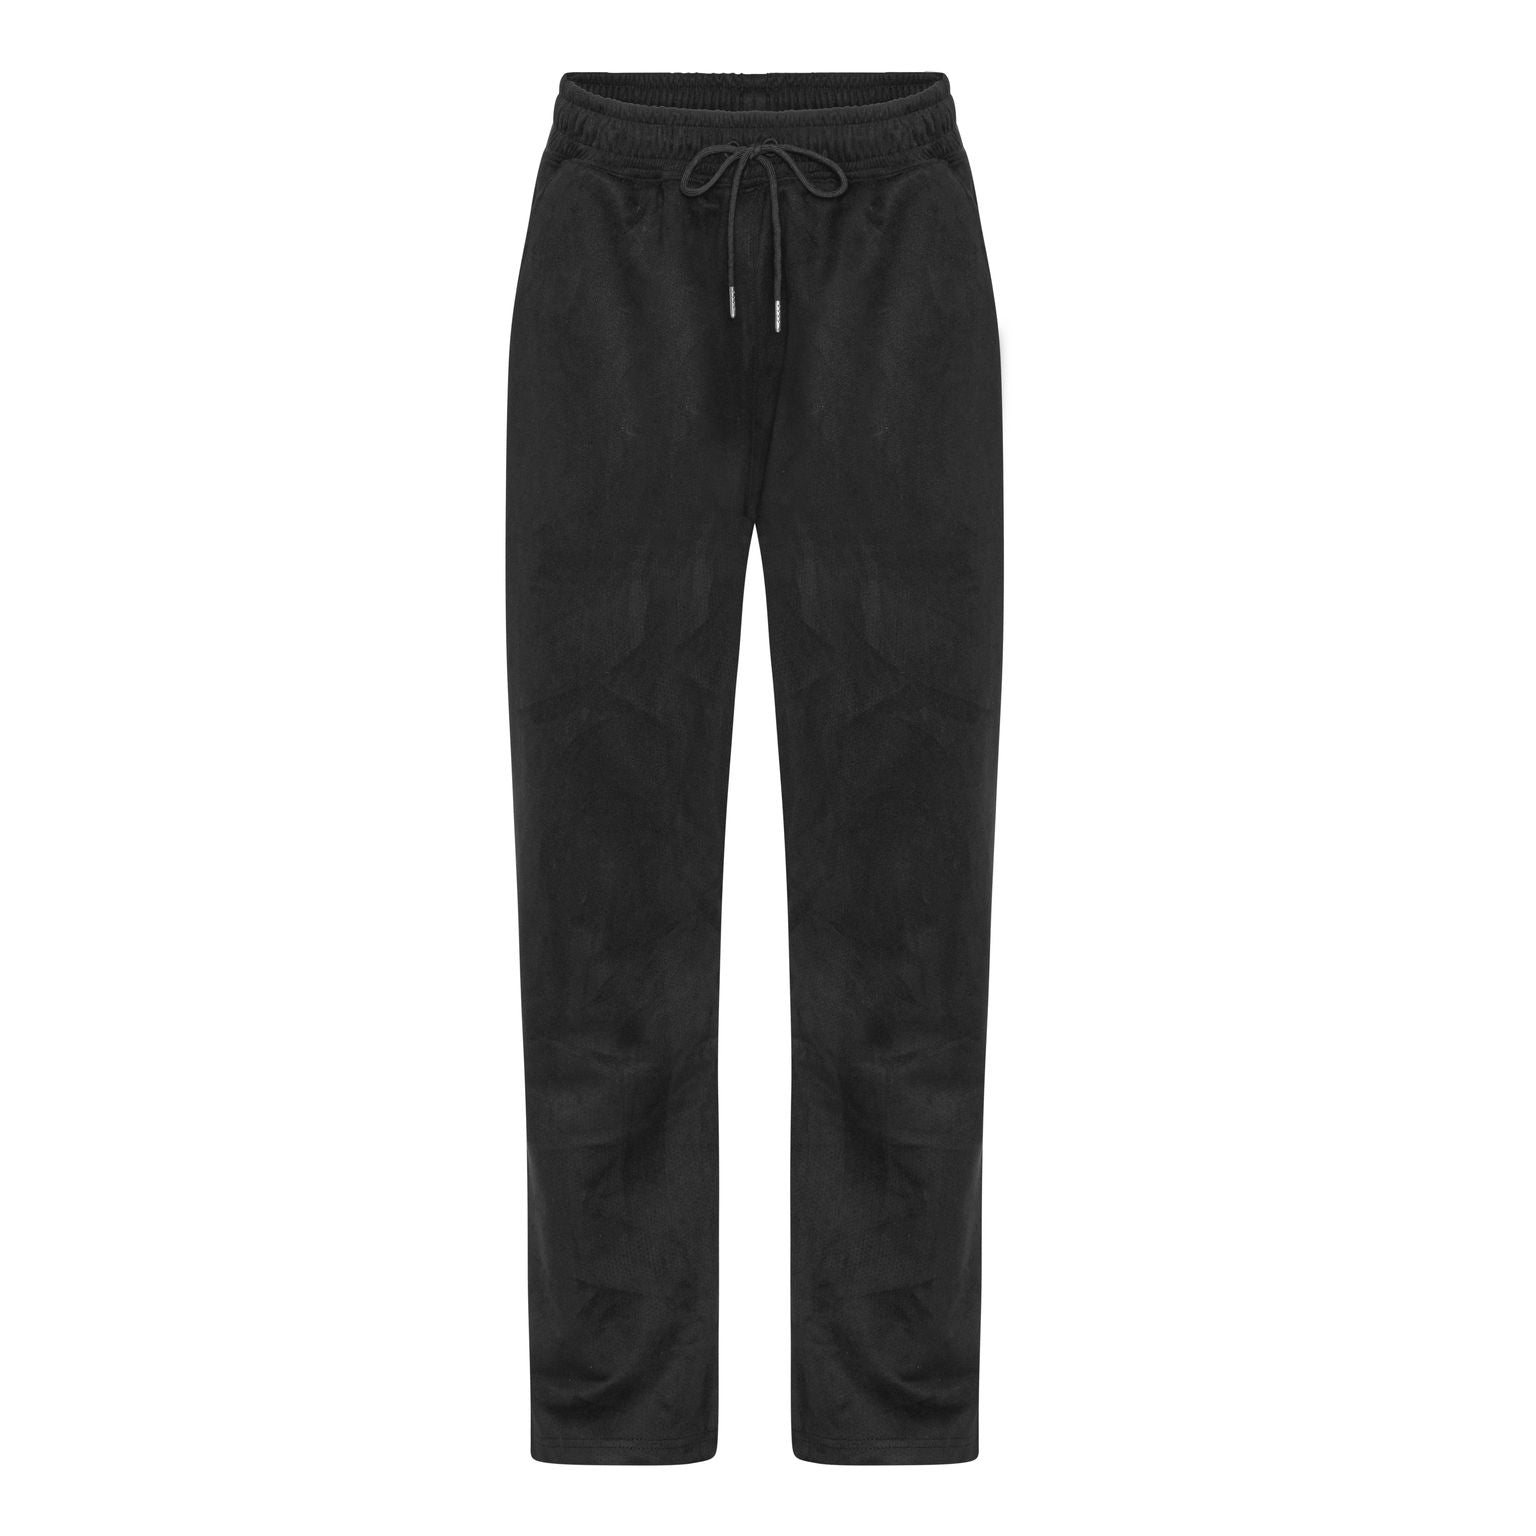 Imitation suede trousers